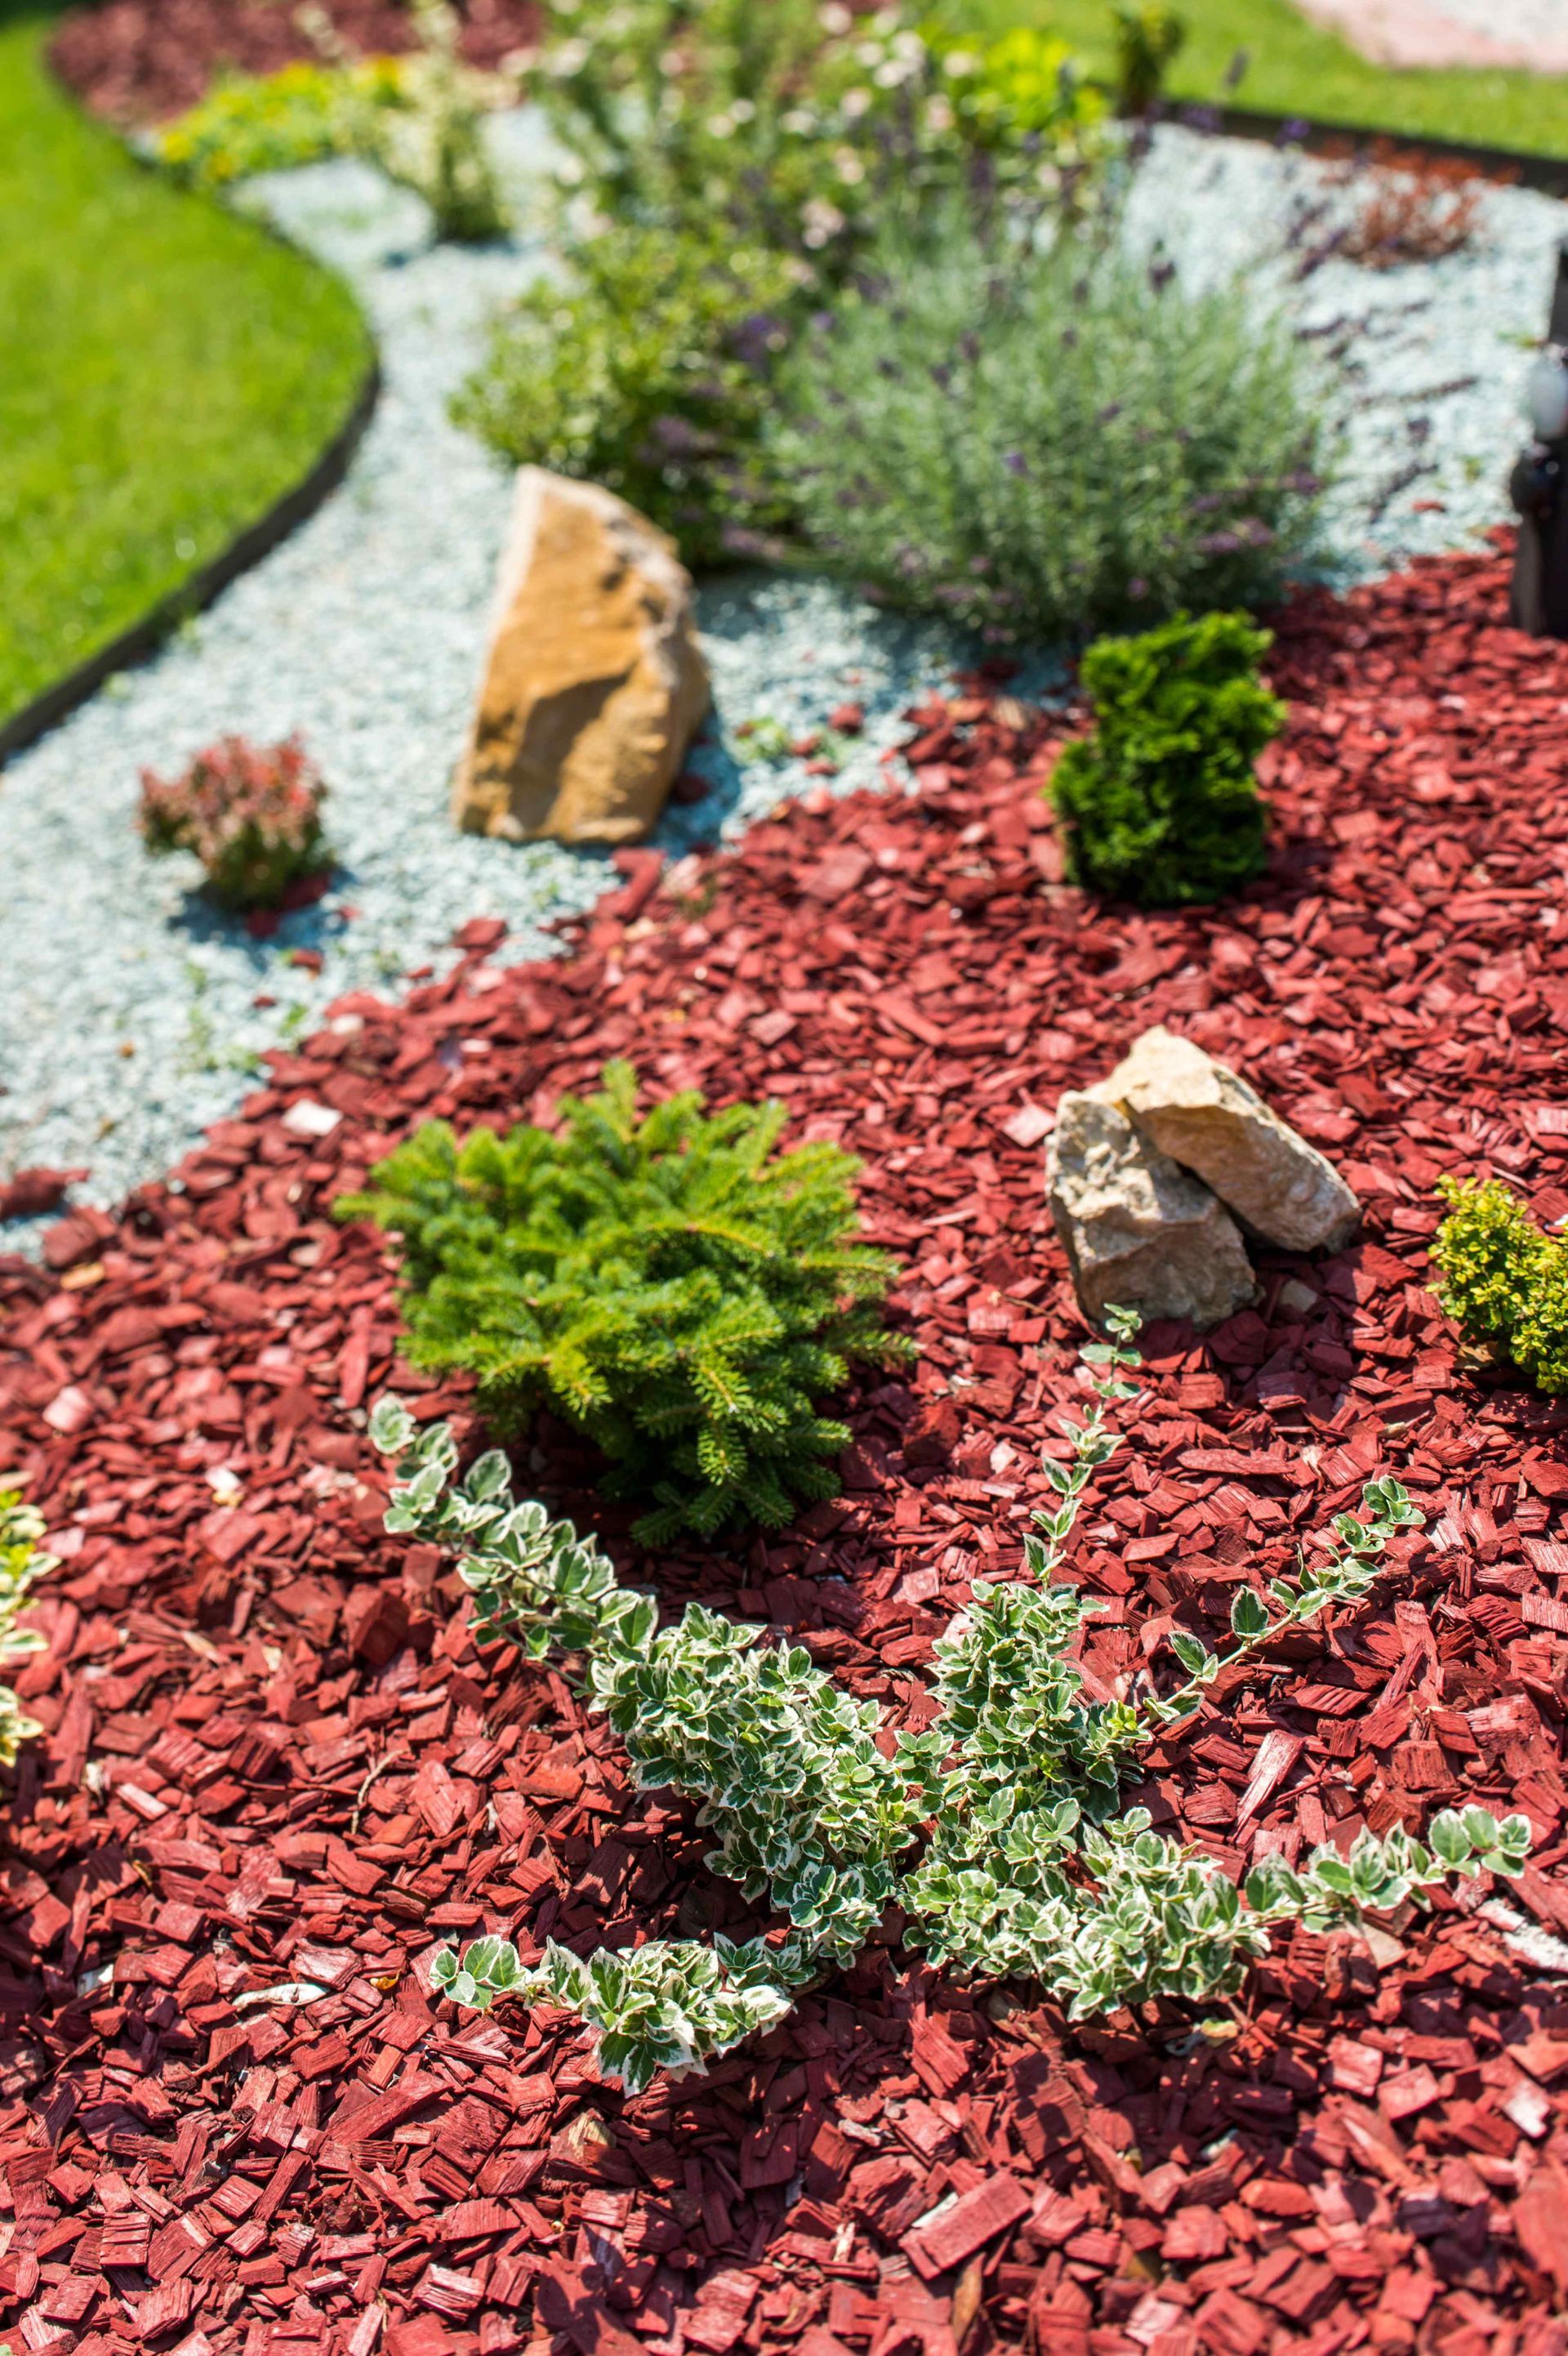 proffessionally landscaped garden bed with gravel and mulch around small shrubs